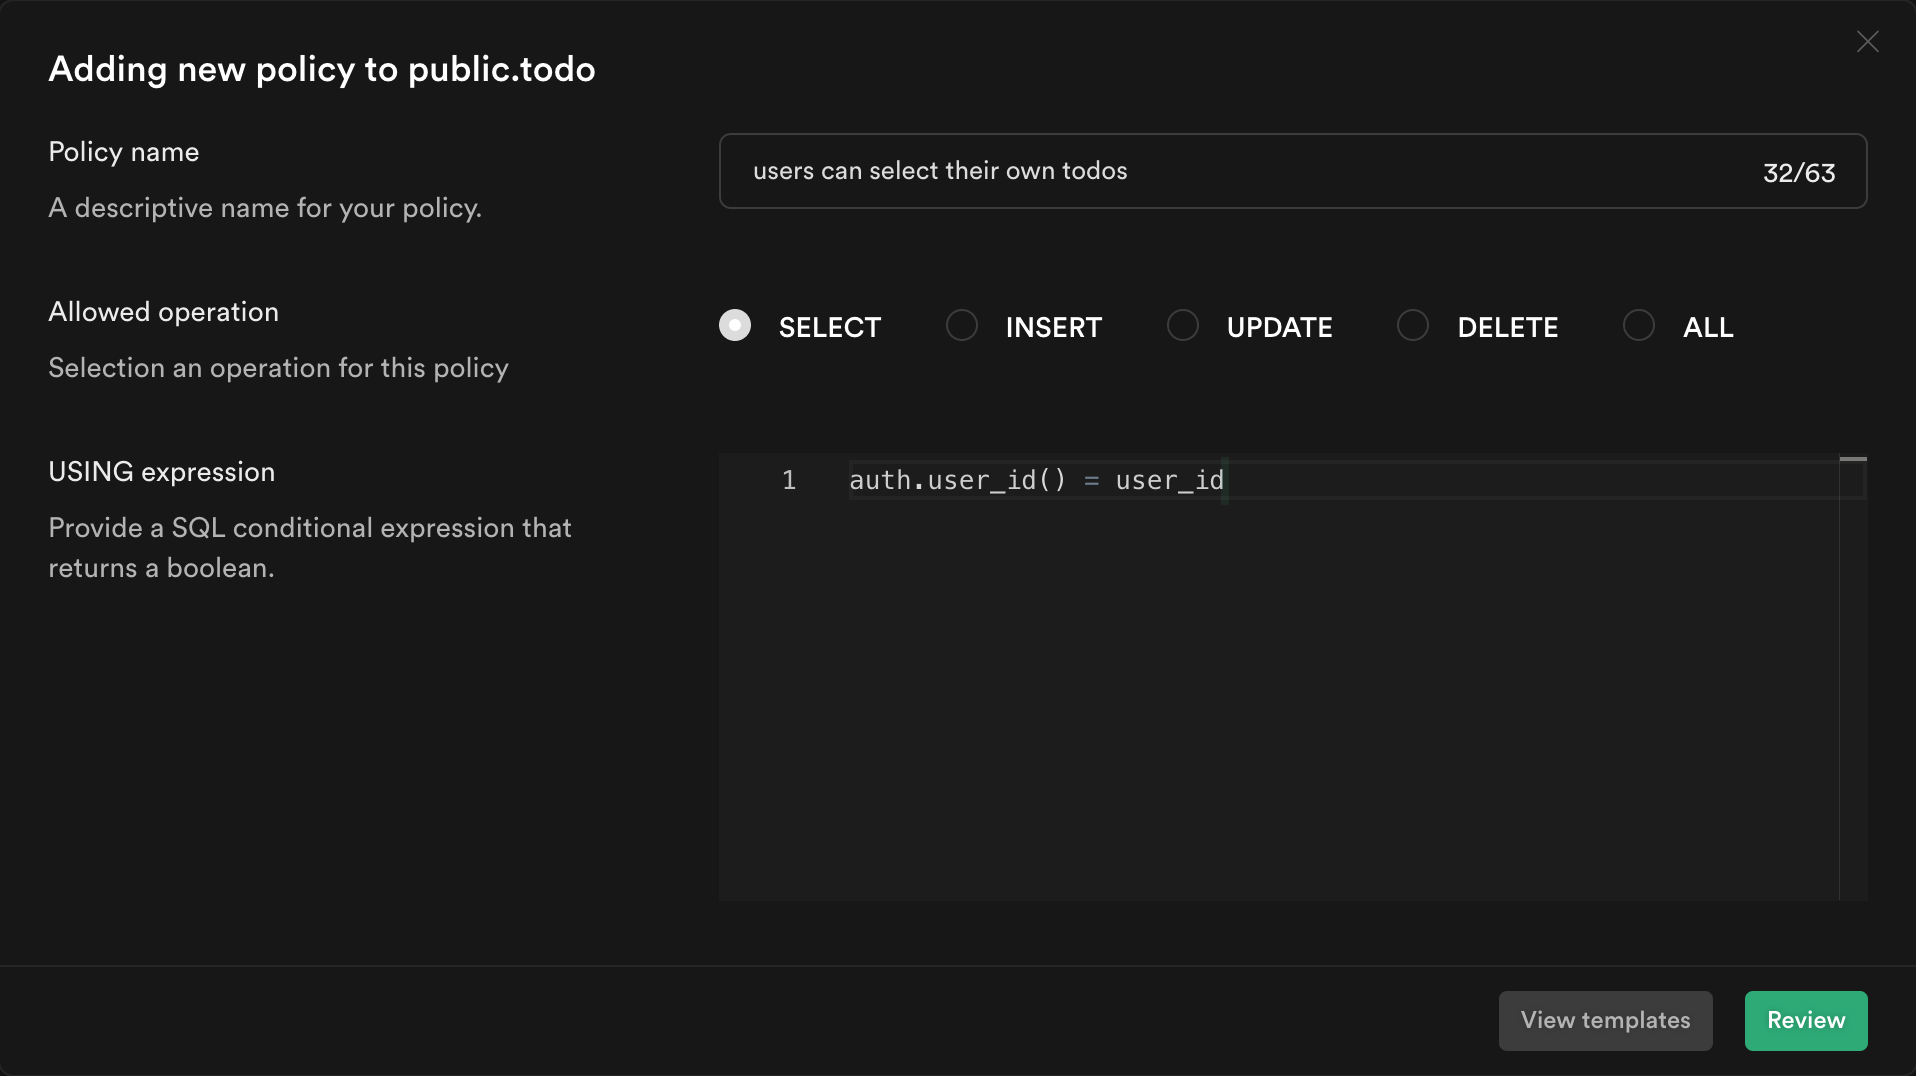 Policy settings for SELECT